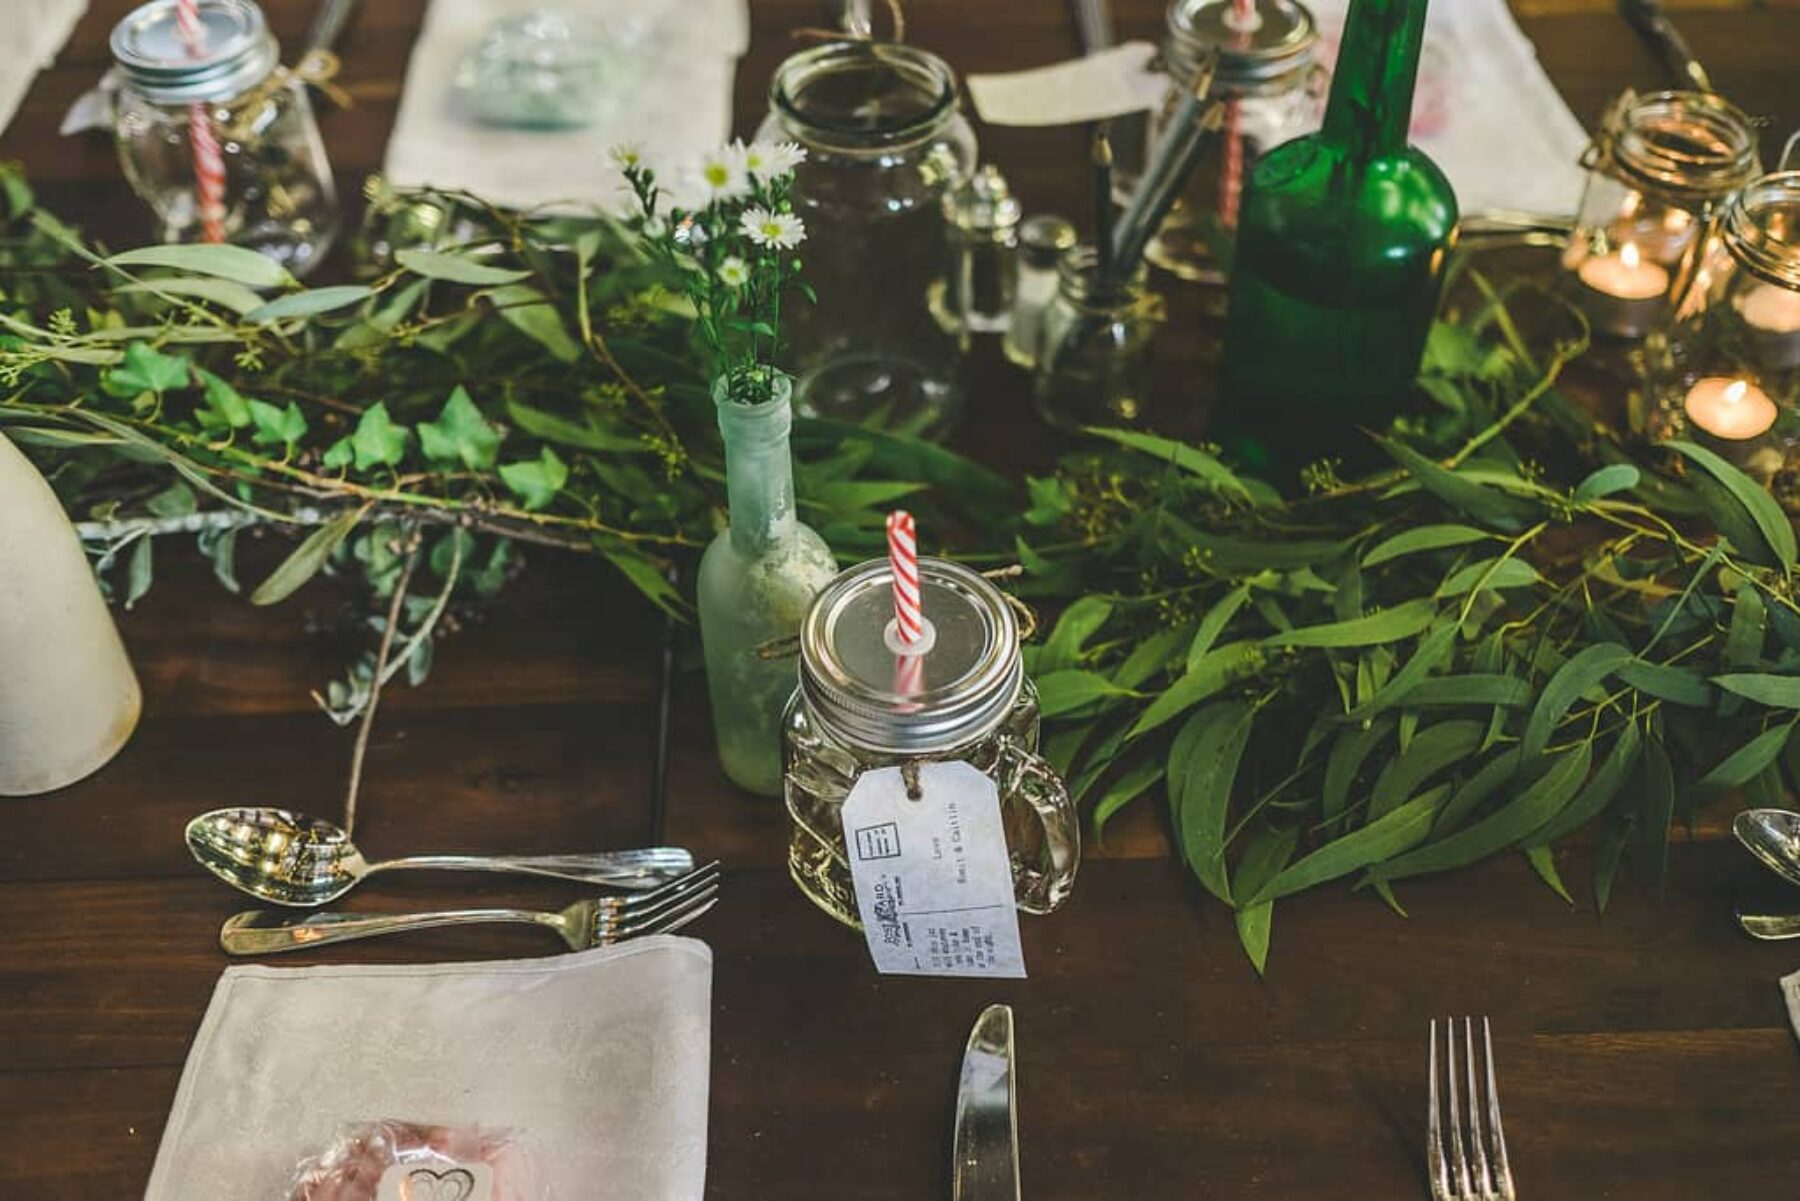 Rustic tablescape with mason jar drinks